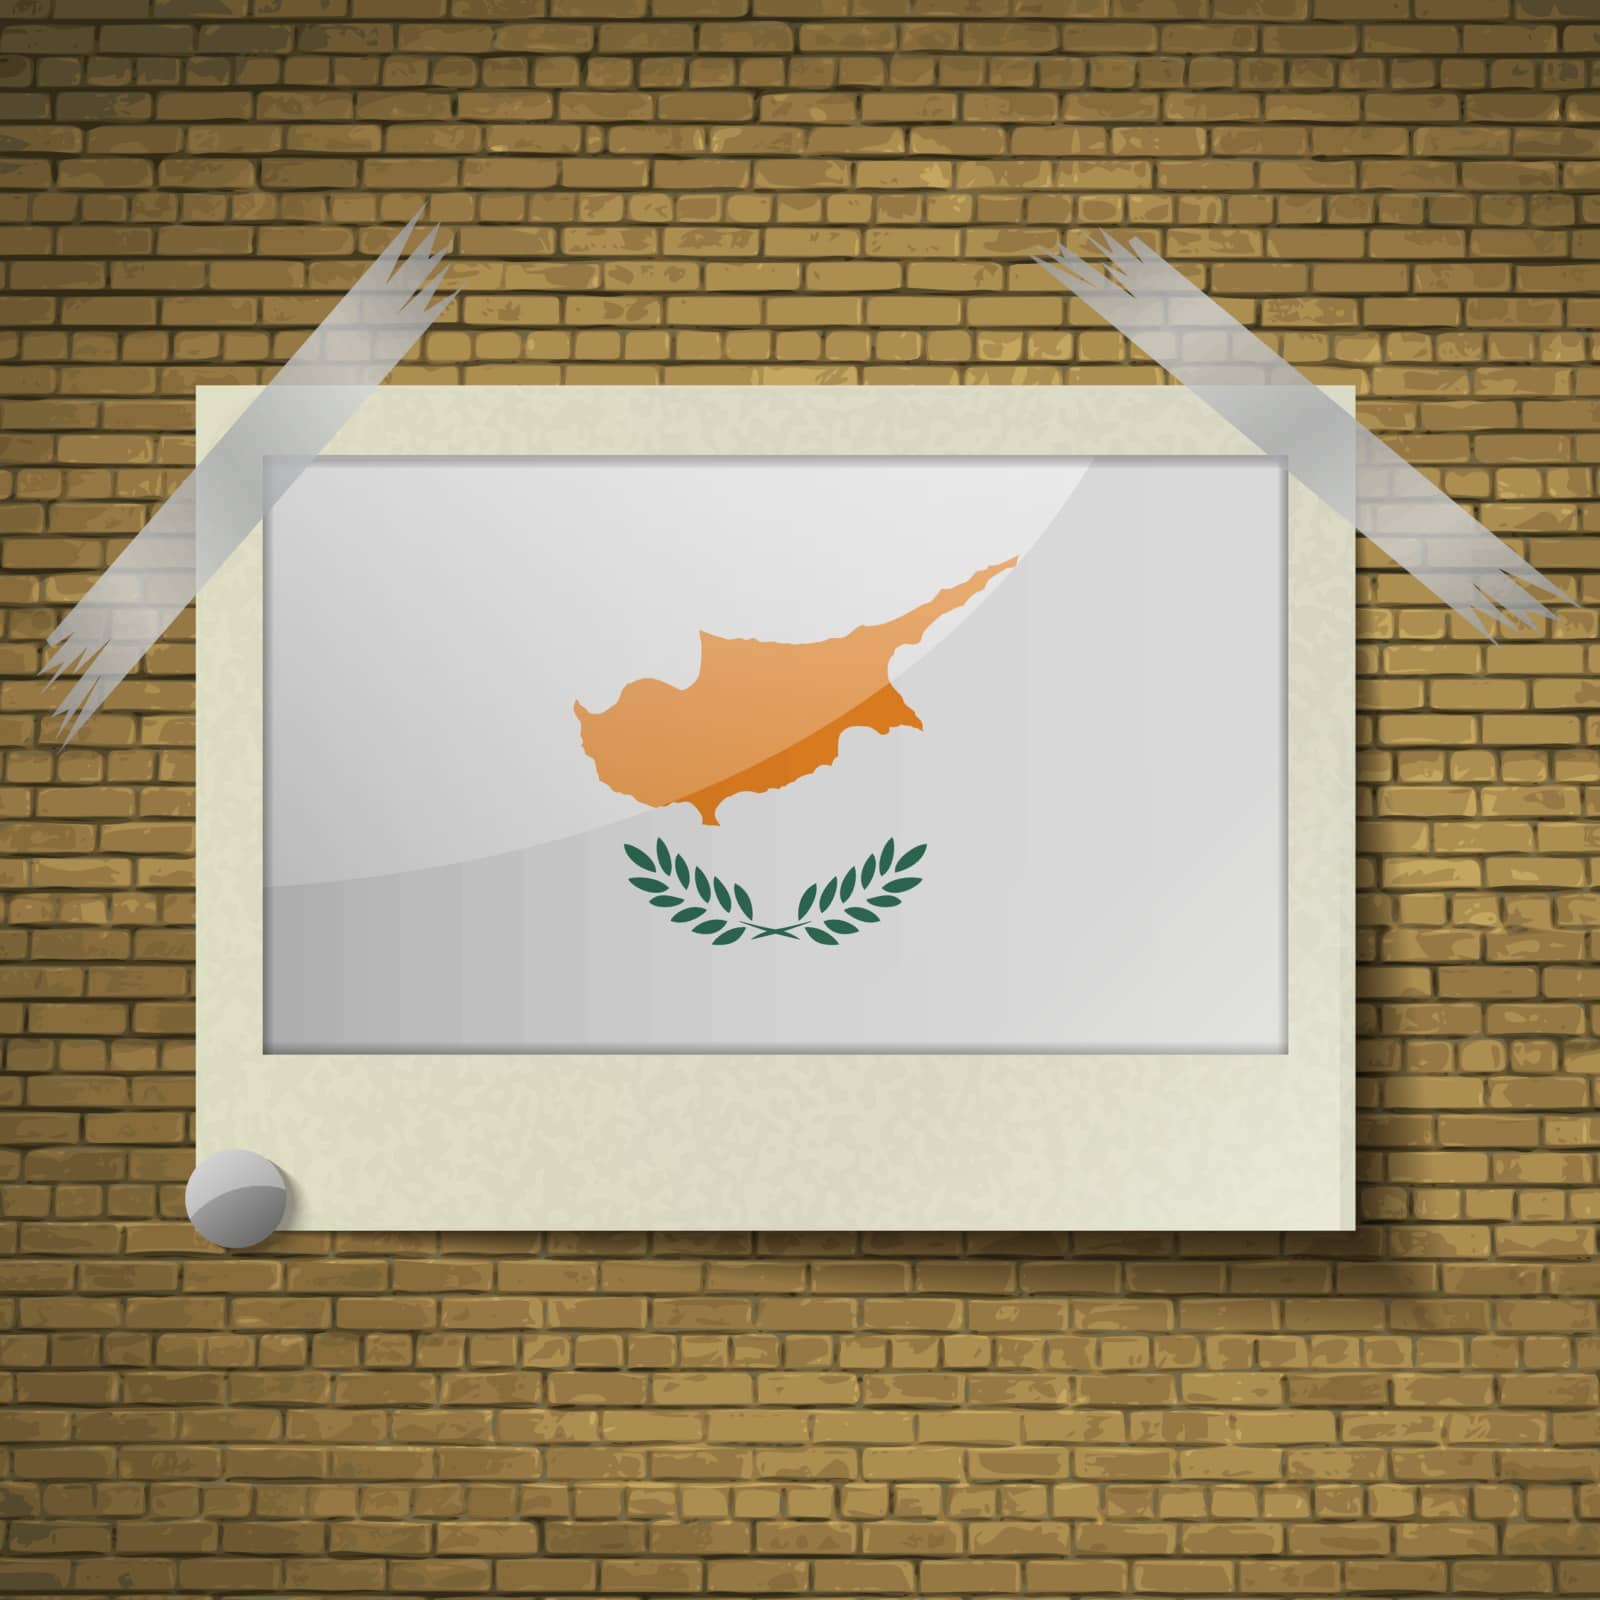 Flags of Cyprus at frame on a brick background. Vector illustration